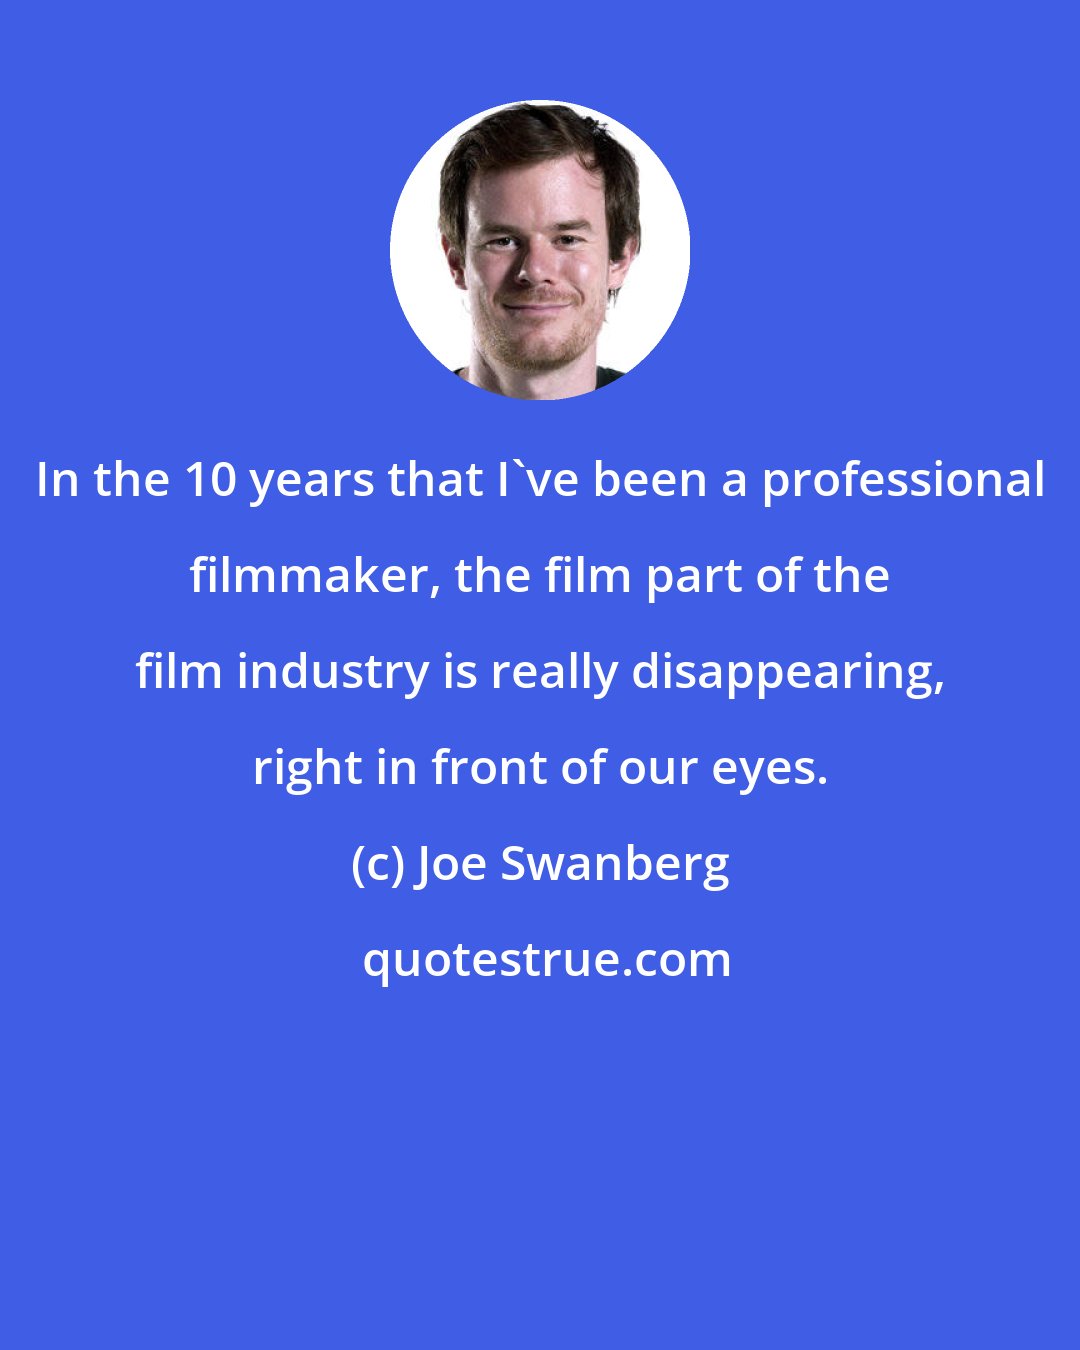 Joe Swanberg: In the 10 years that I've been a professional filmmaker, the film part of the film industry is really disappearing, right in front of our eyes.